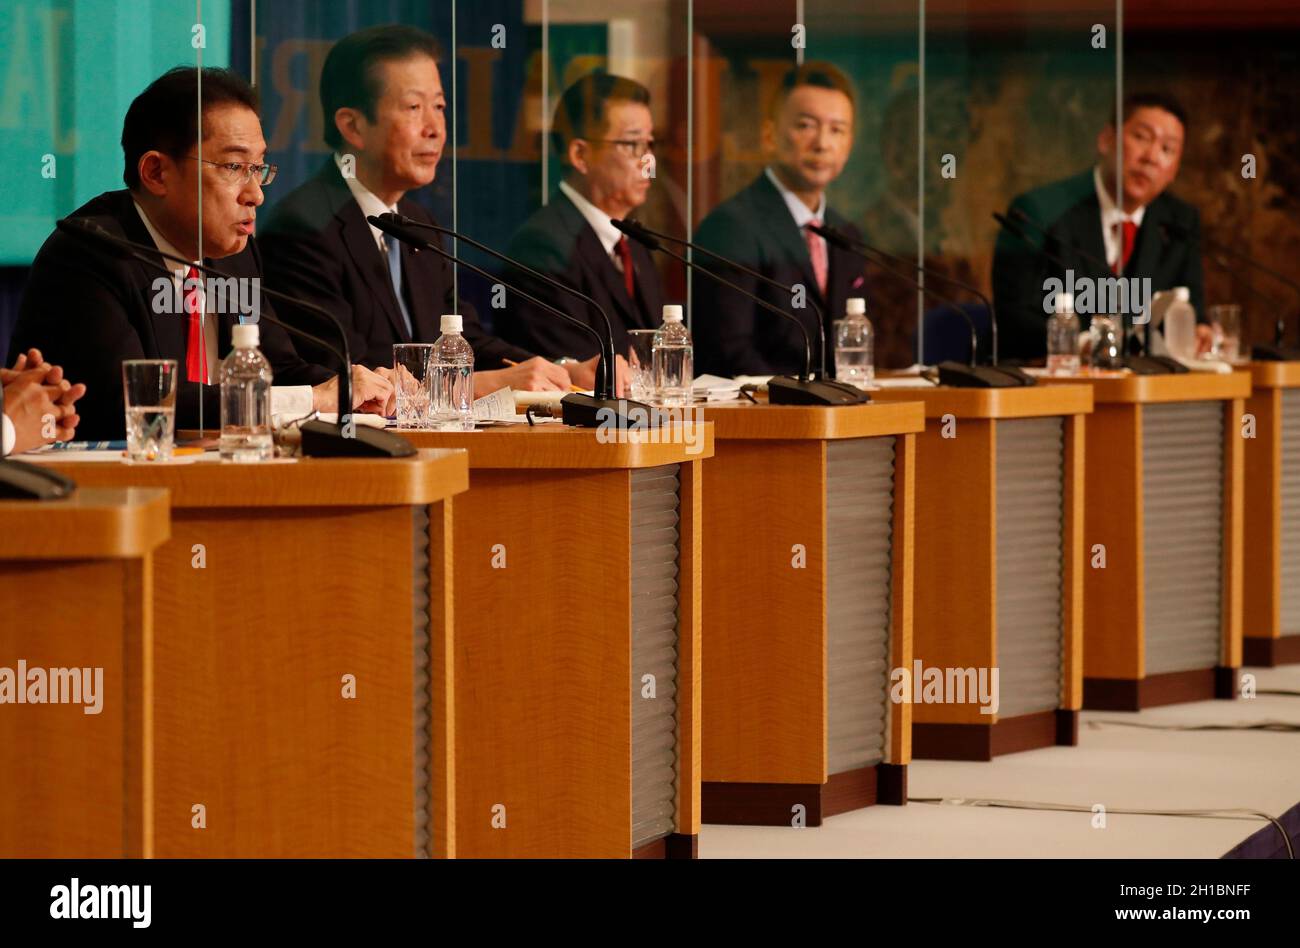 Tokyo, Japan. 18th Oct, 2021. Japanfs Prime Minister Fumio Kishida (L), who is also ruling Liberal Democratic Party President, attends a debate session with other leaders of Japan's main political parties ahead of October 31, 2021 lower house election, at the Japan National Press Club in Tokyo, Japan October 18, 2021. (Photo by Issei Kato/SOPA Images/Sipa USA) Credit: Sipa USA/Alamy Live News Stock Photo